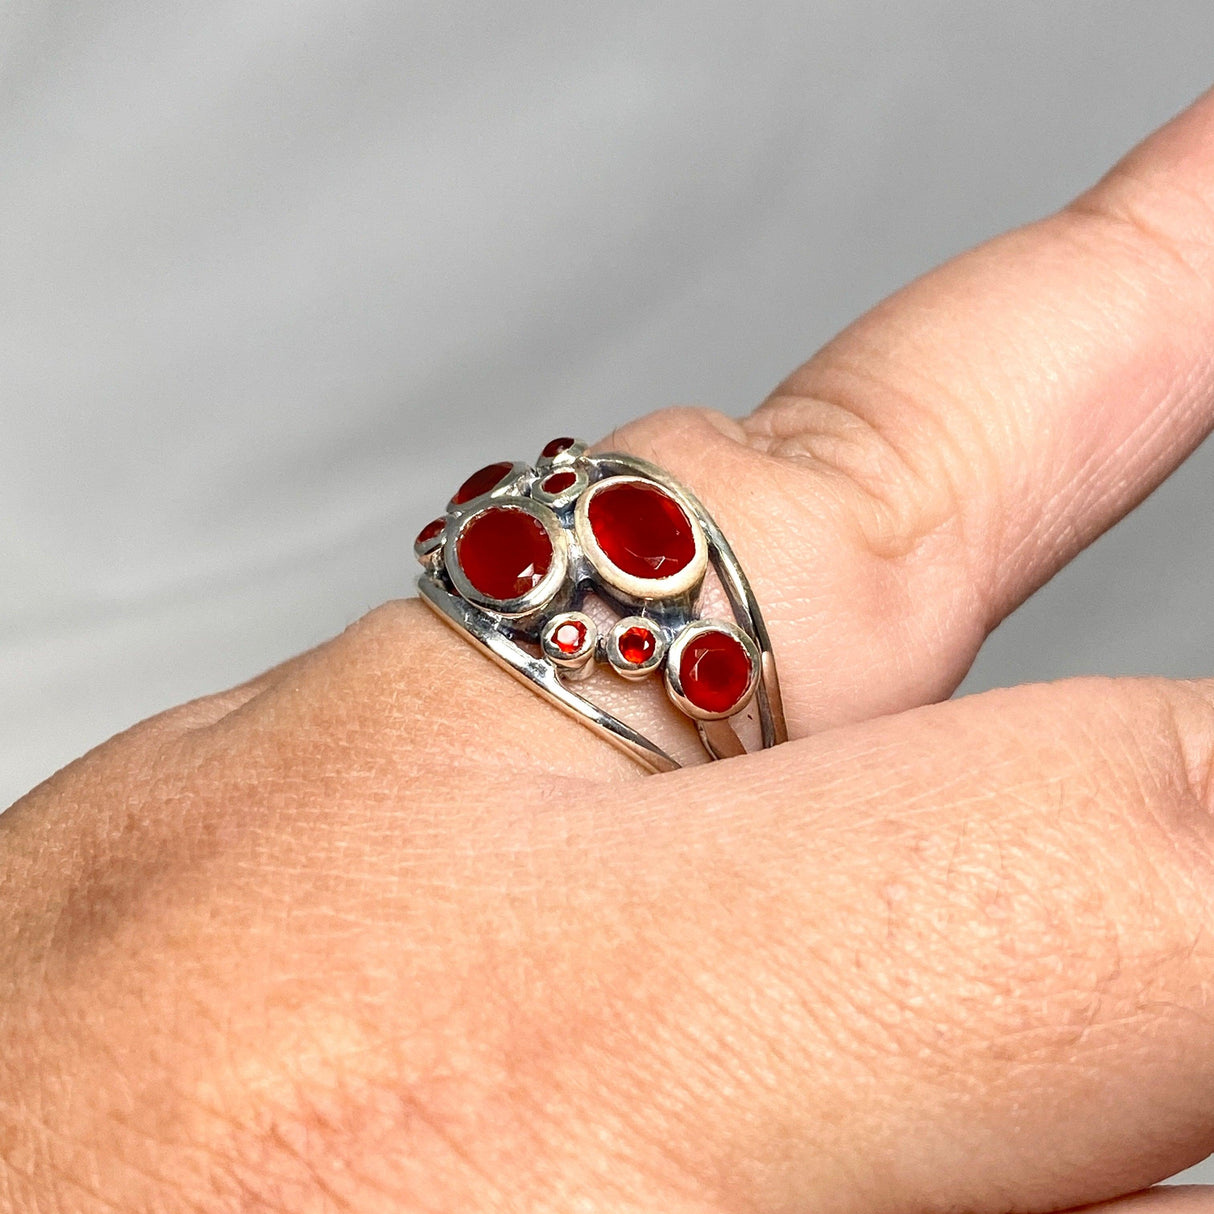 Carnelian Faceted Multistone Gemstone Ring in a Decorative Setting R3787 - Nature's Magick